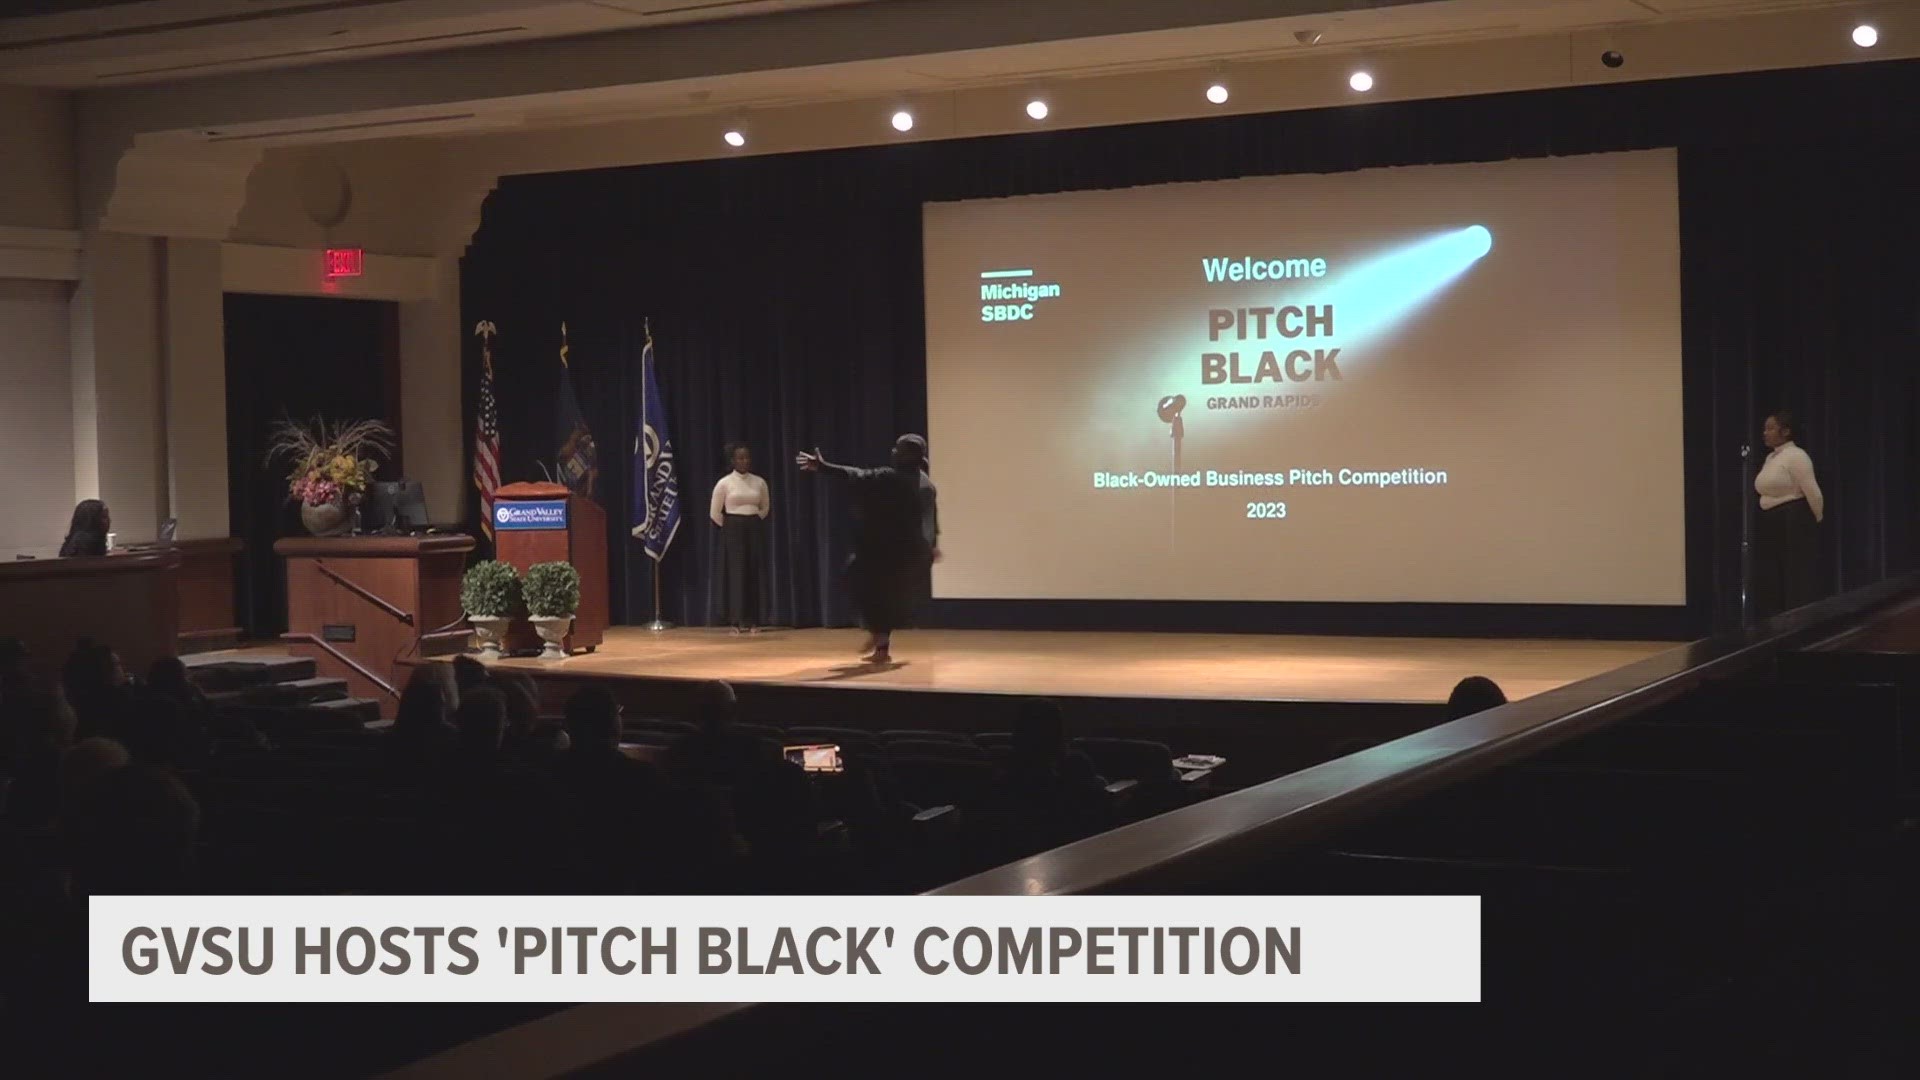 Pitch Black is a chance for Black entrepreneurs to identify problems, use their businesses to help address those issues, and win money for the ideas they pitch.